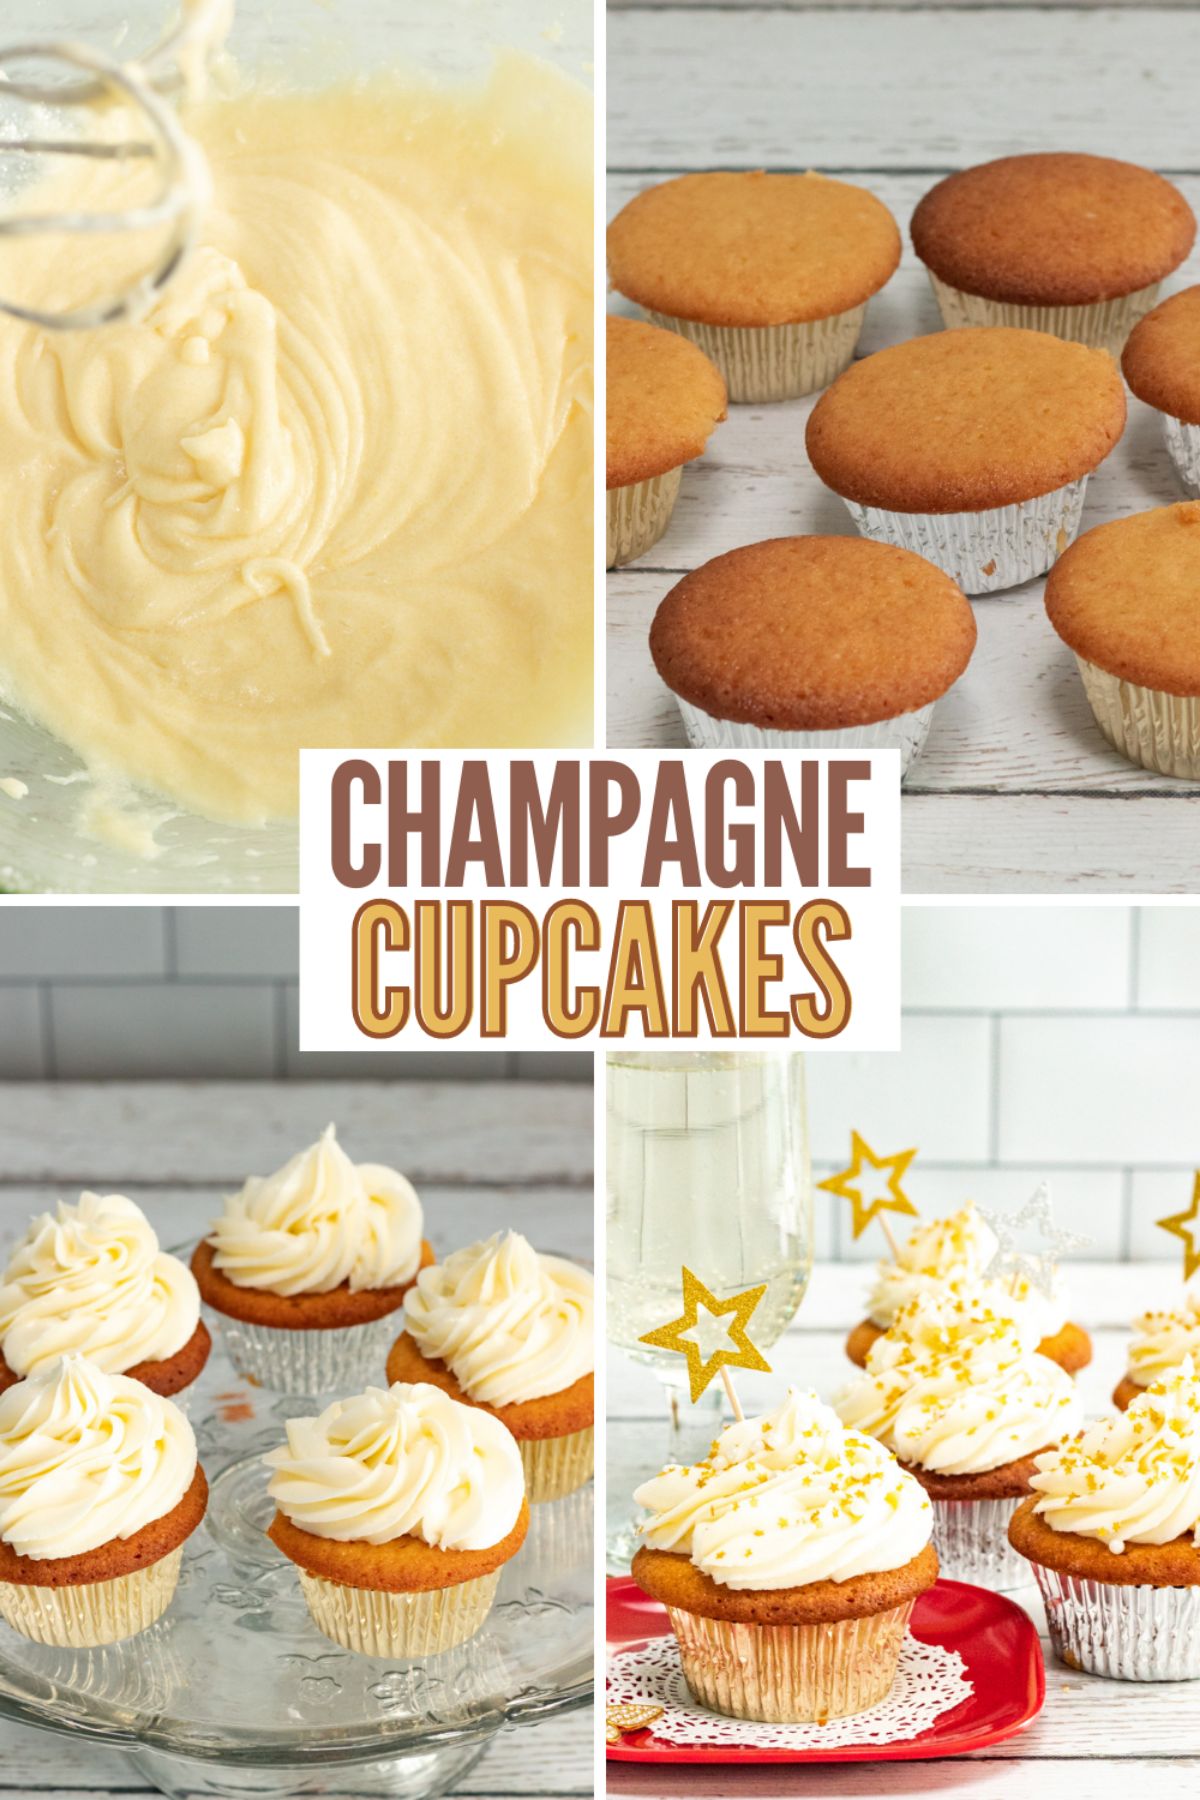 Champagne Cupcakes are soft cupcakes that are topped with sweet and flavor icing. If you like champagne and cake then this recipe is for you. #champagne #cupcakes #champagnecupcakes #recipe #newyearseve via @wondermomwannab